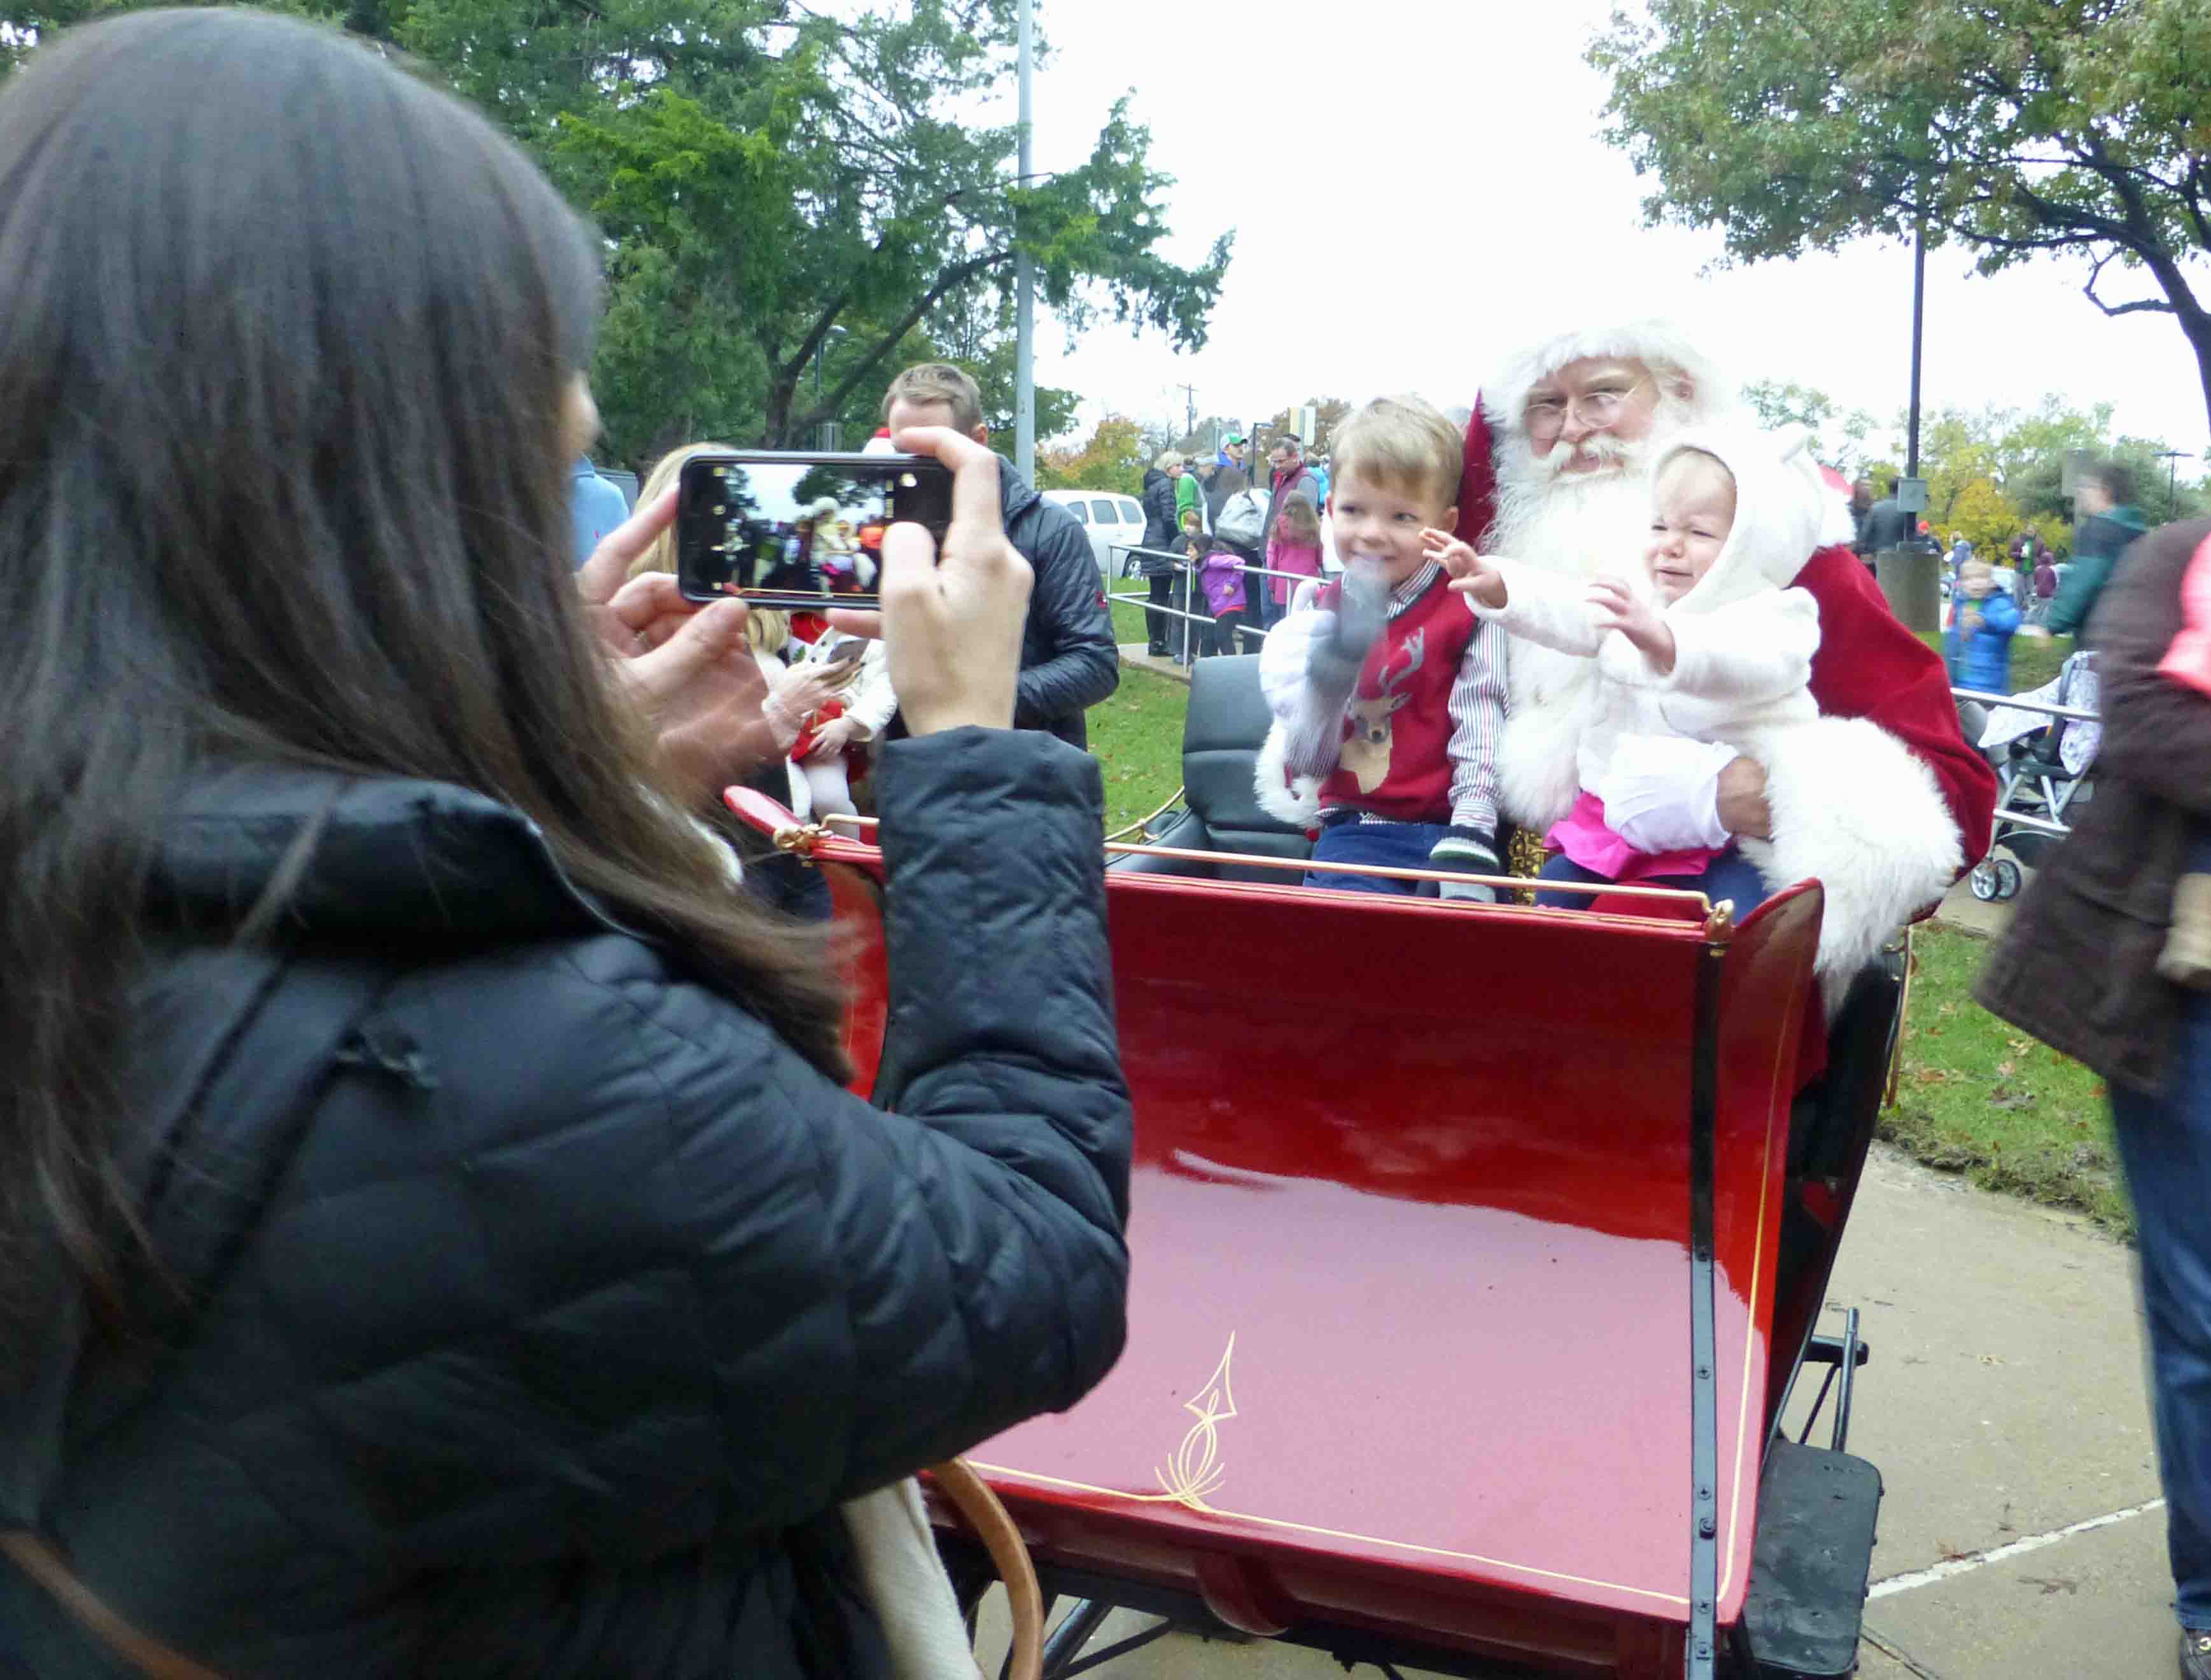 Bring your own camera to take photos with Santa at the 2nd annual 'Light Up the Highlands'